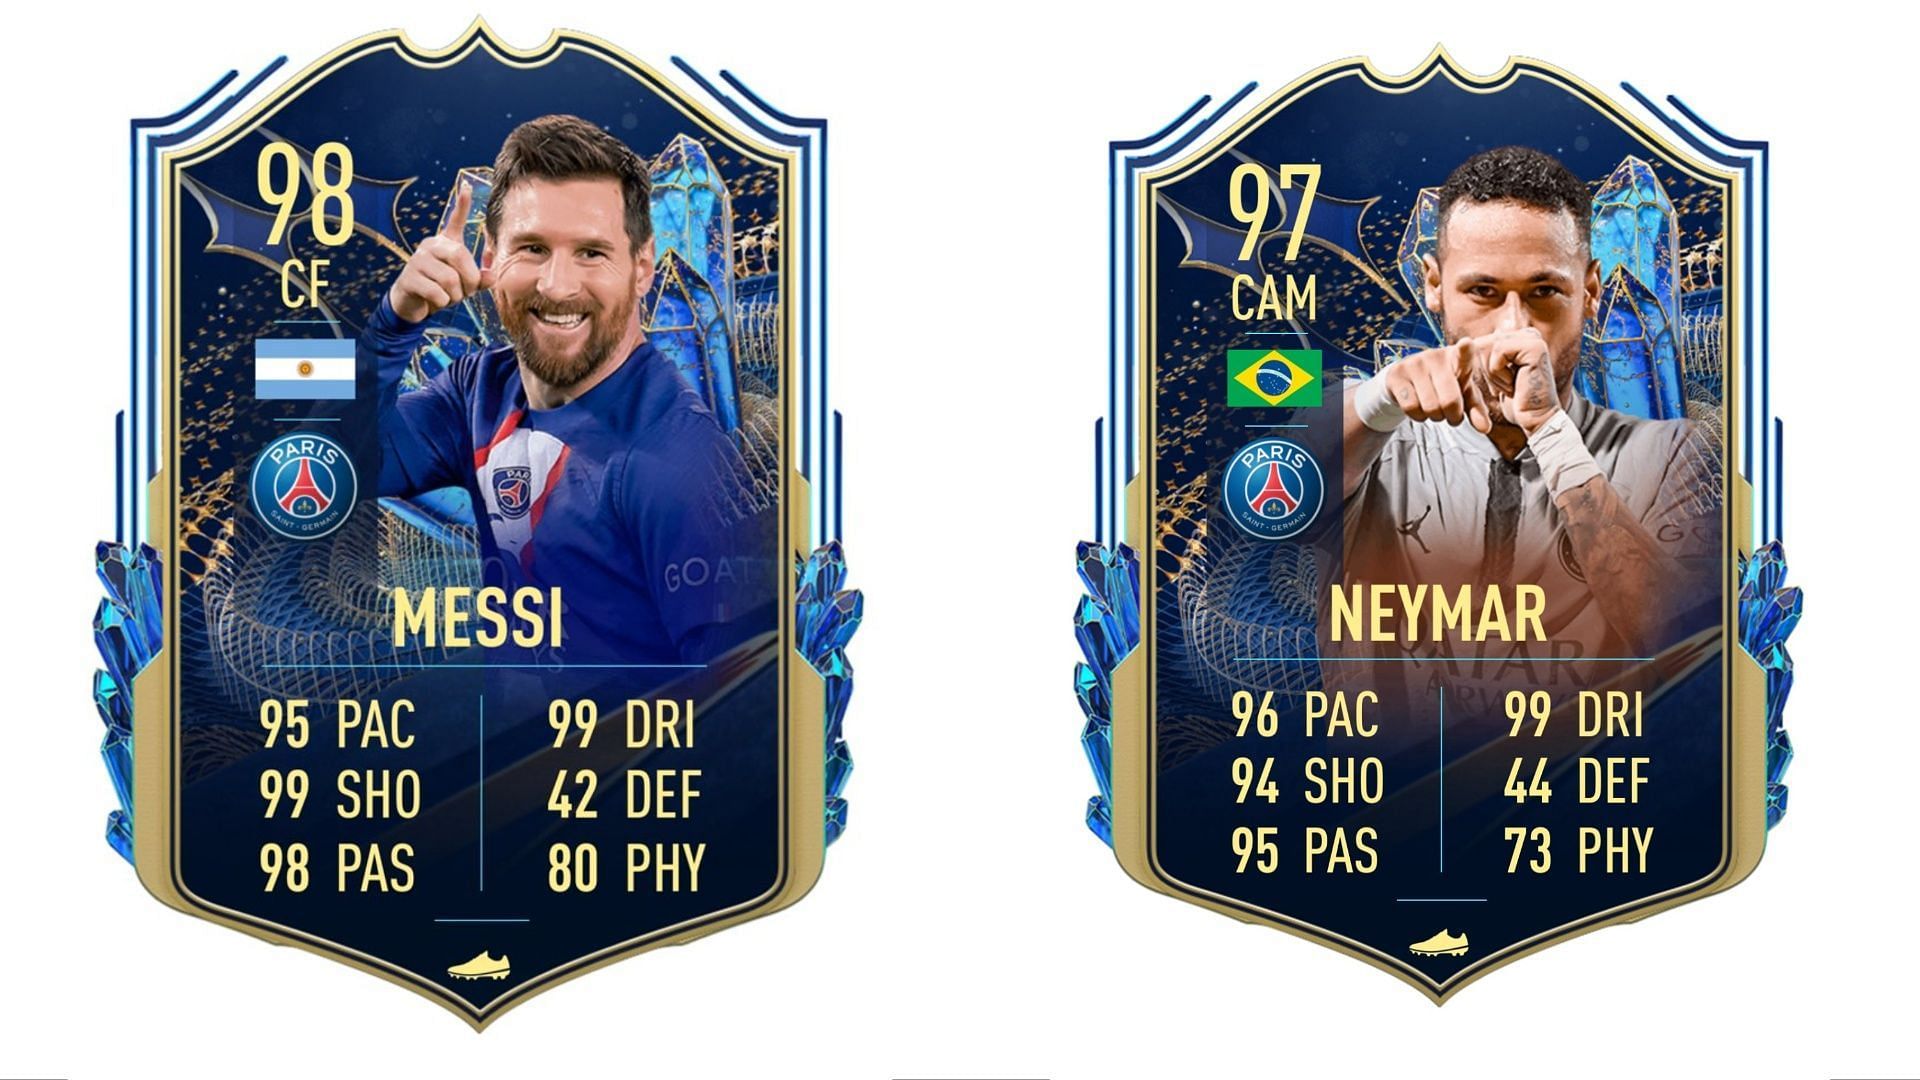 FIFA 23 TOTY guide with mega cards for Mbappe, Messi and Modric